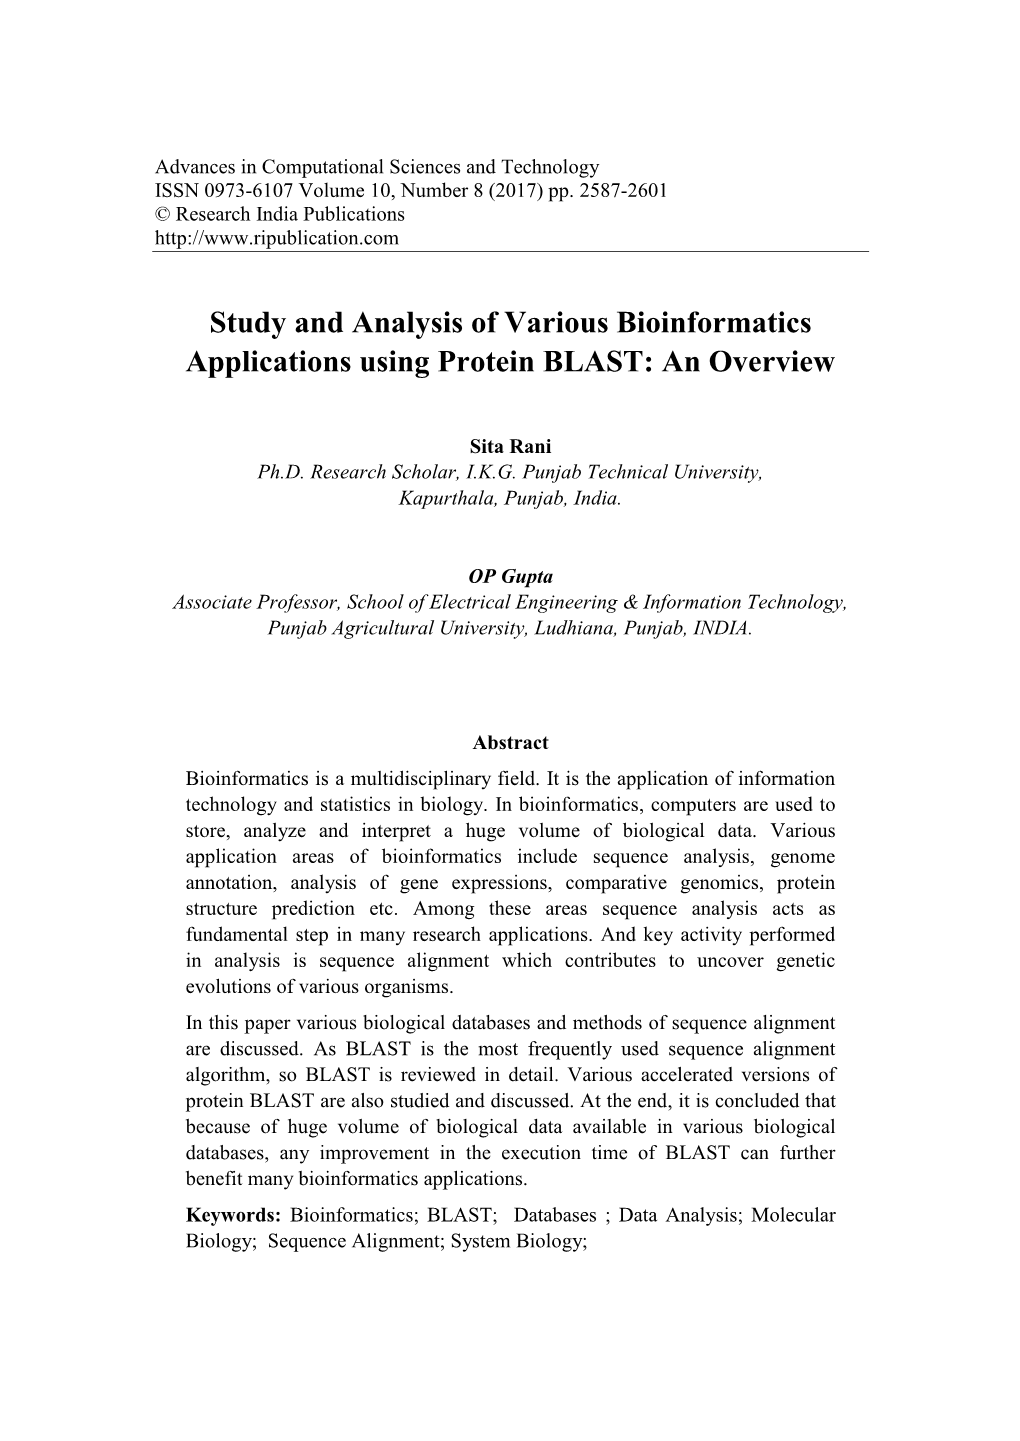 Study and Analysis of Various Bioinformatics Applications Using Protein BLAST: an Overview